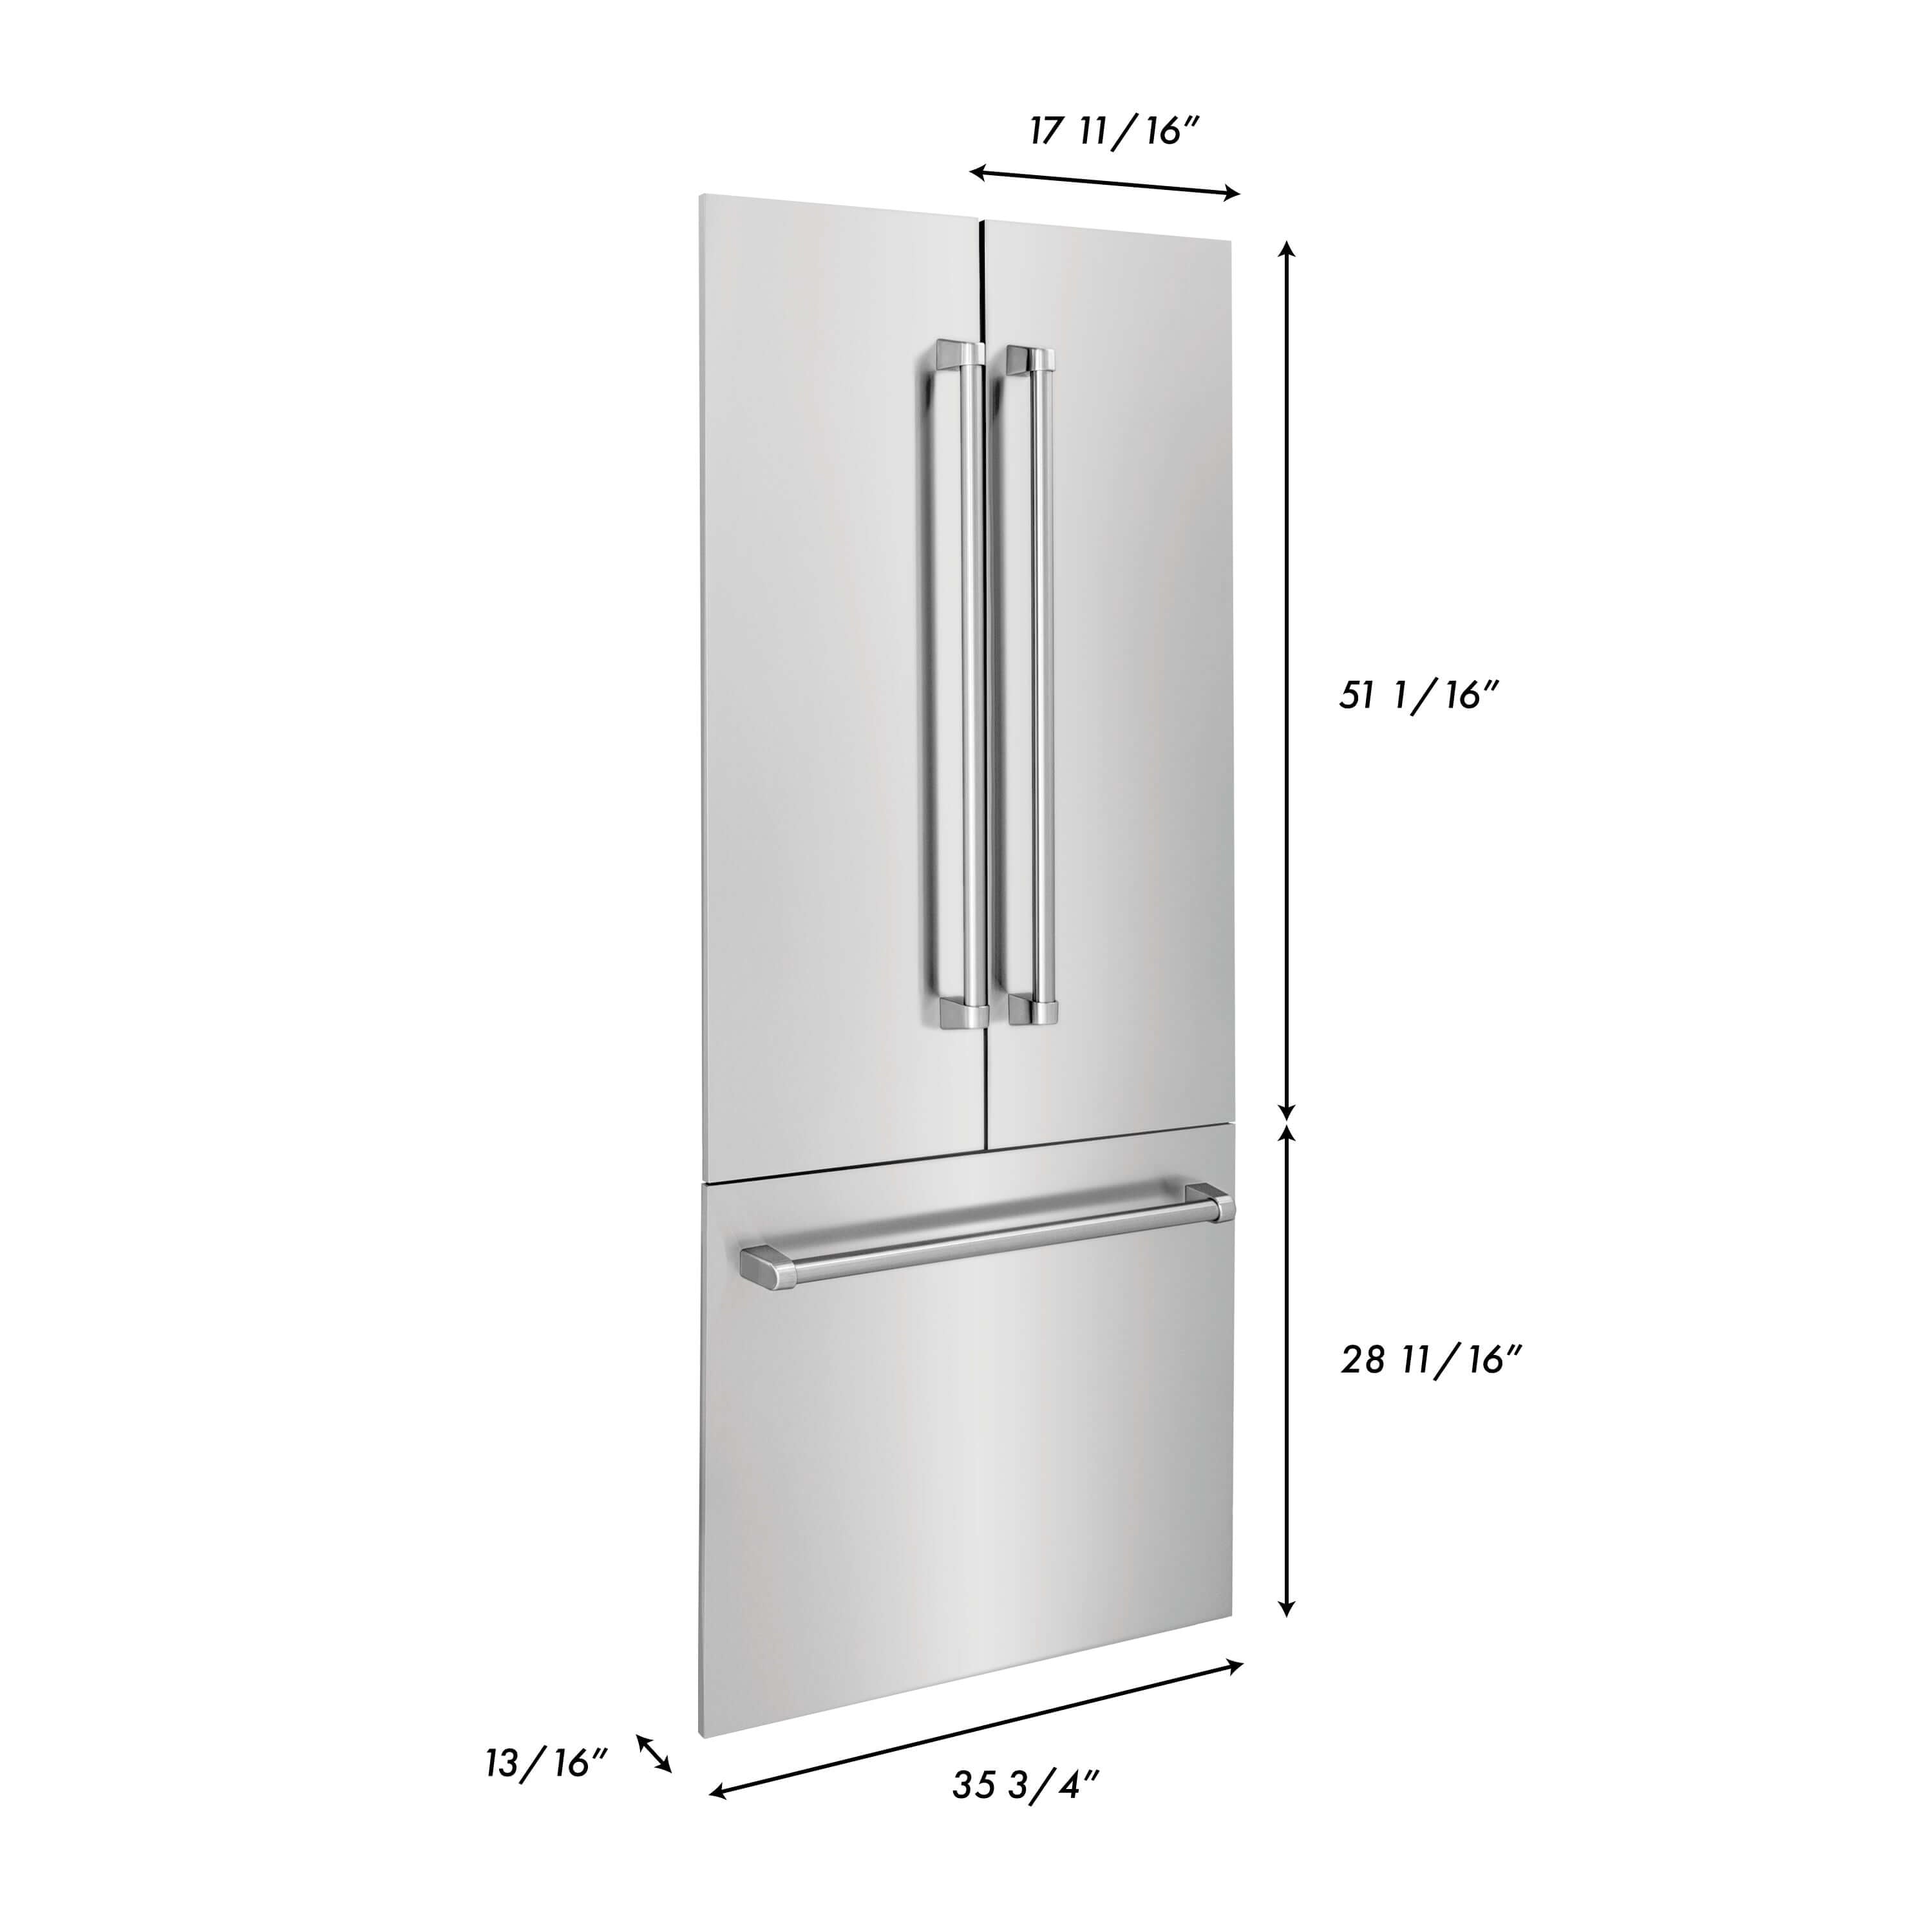 Panels & Handles Only- ZLINE 36 in. Refrigerator Panels in Stainless Steel for a 36 in. Built-in Refrigerator (RPBIV-304-36) dimensional diagram with measurements.